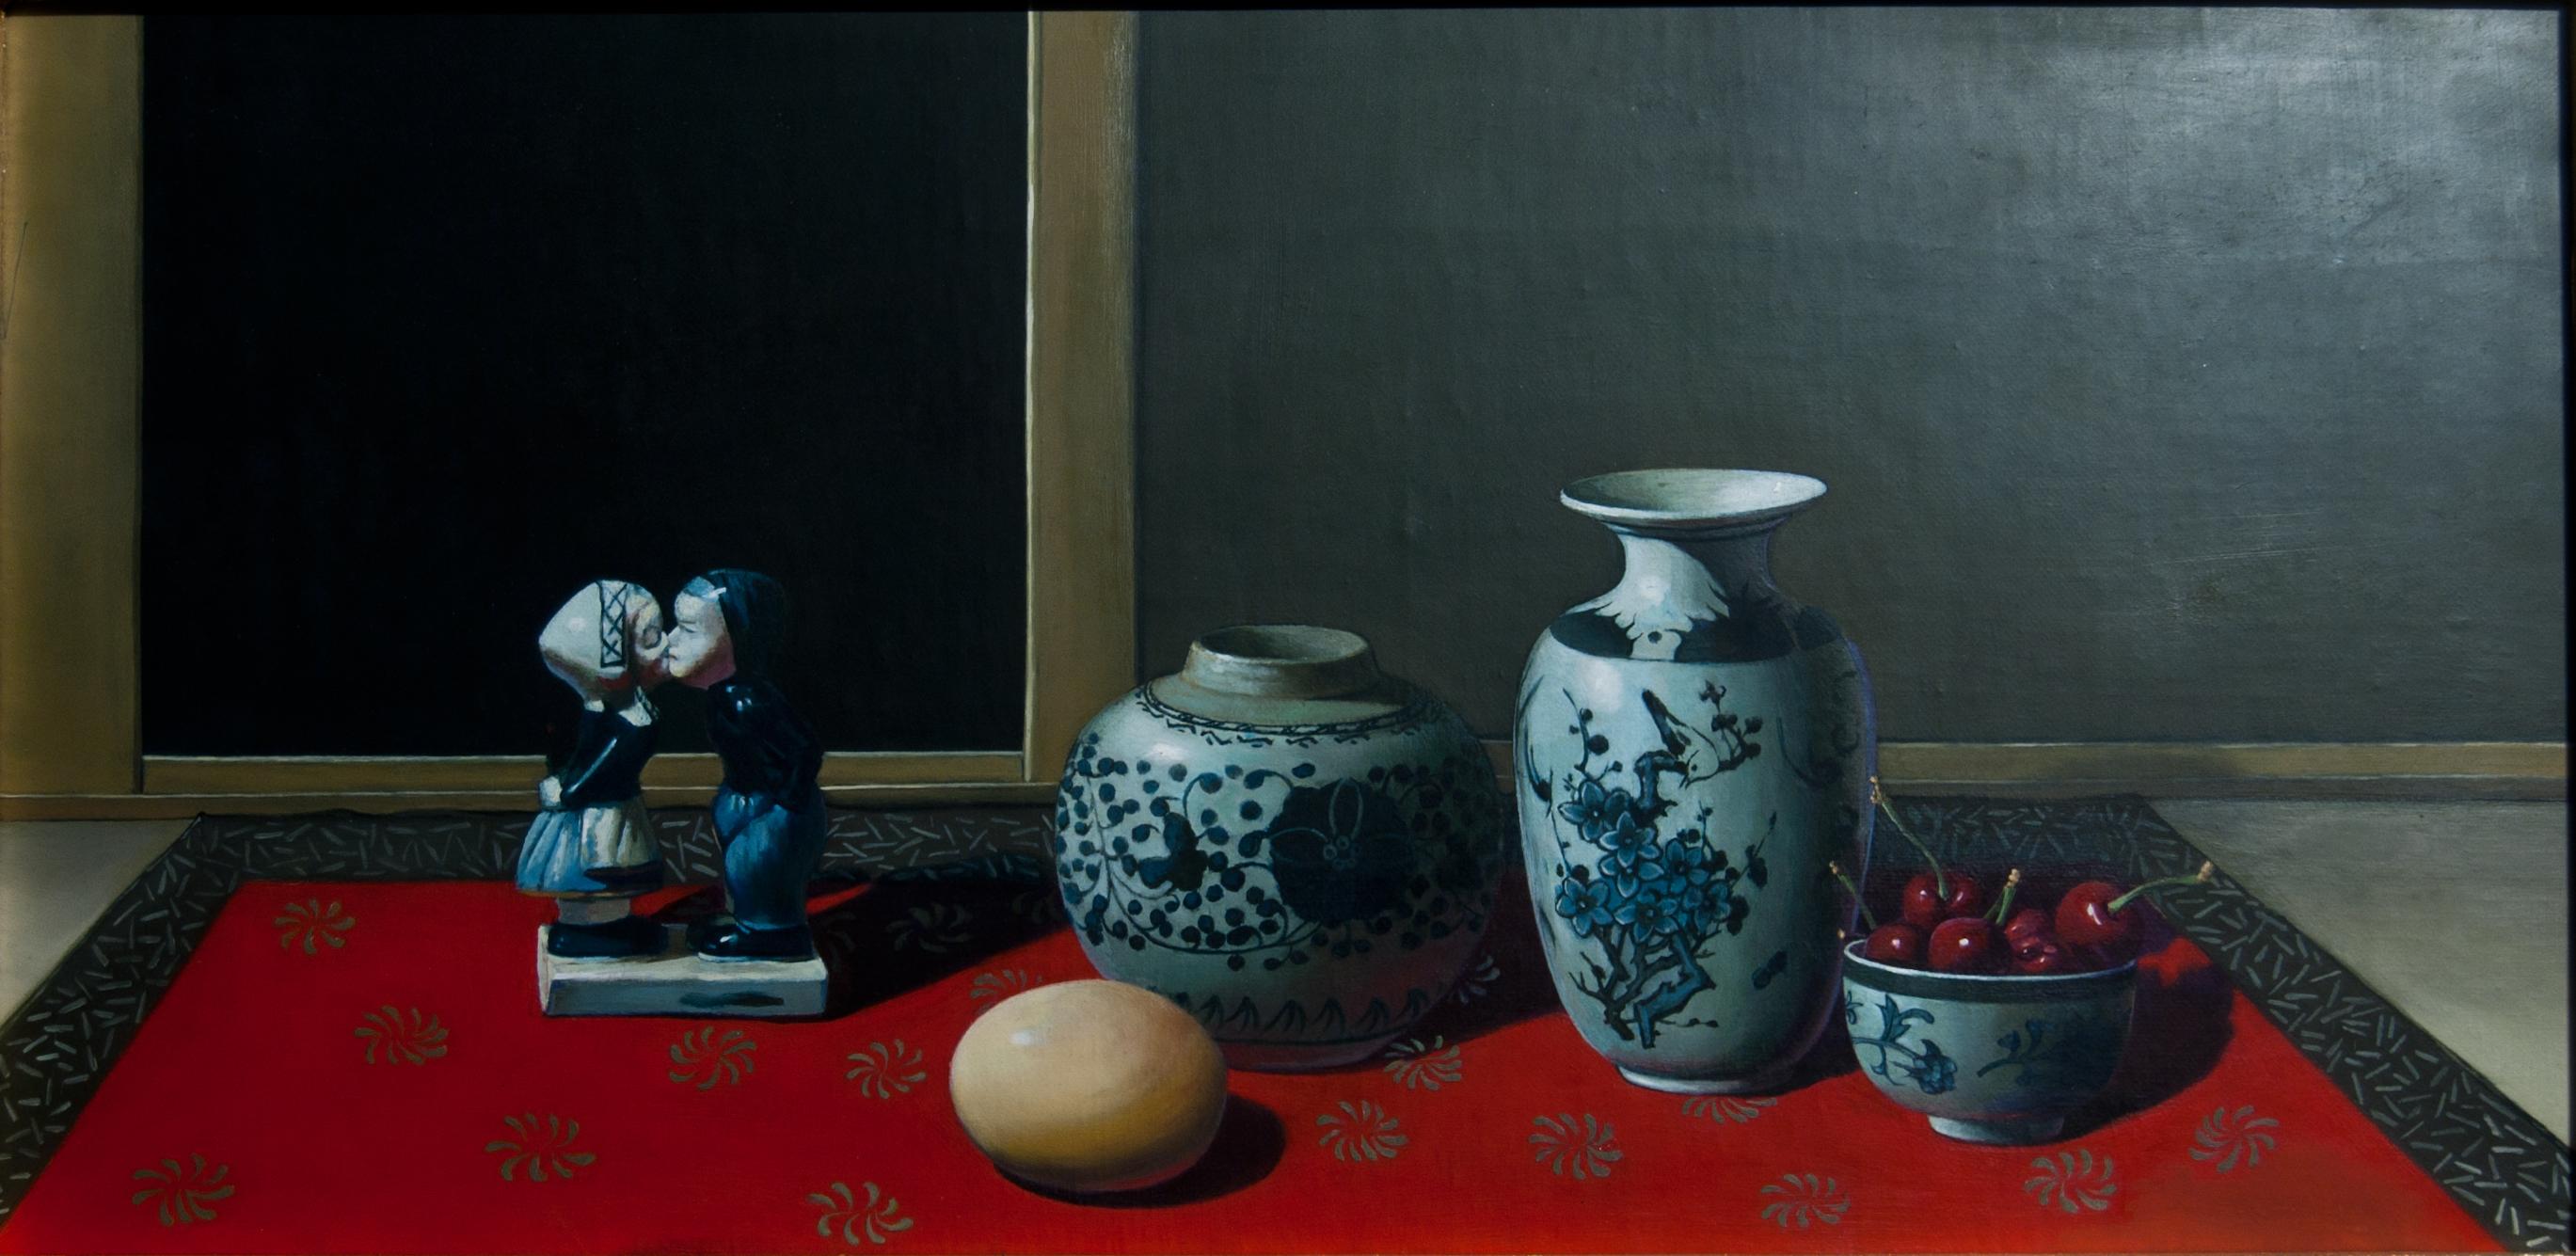 Ceramics, Cherries and Egg - Oil on Canvas by Zhang Wei Guang - 2000s